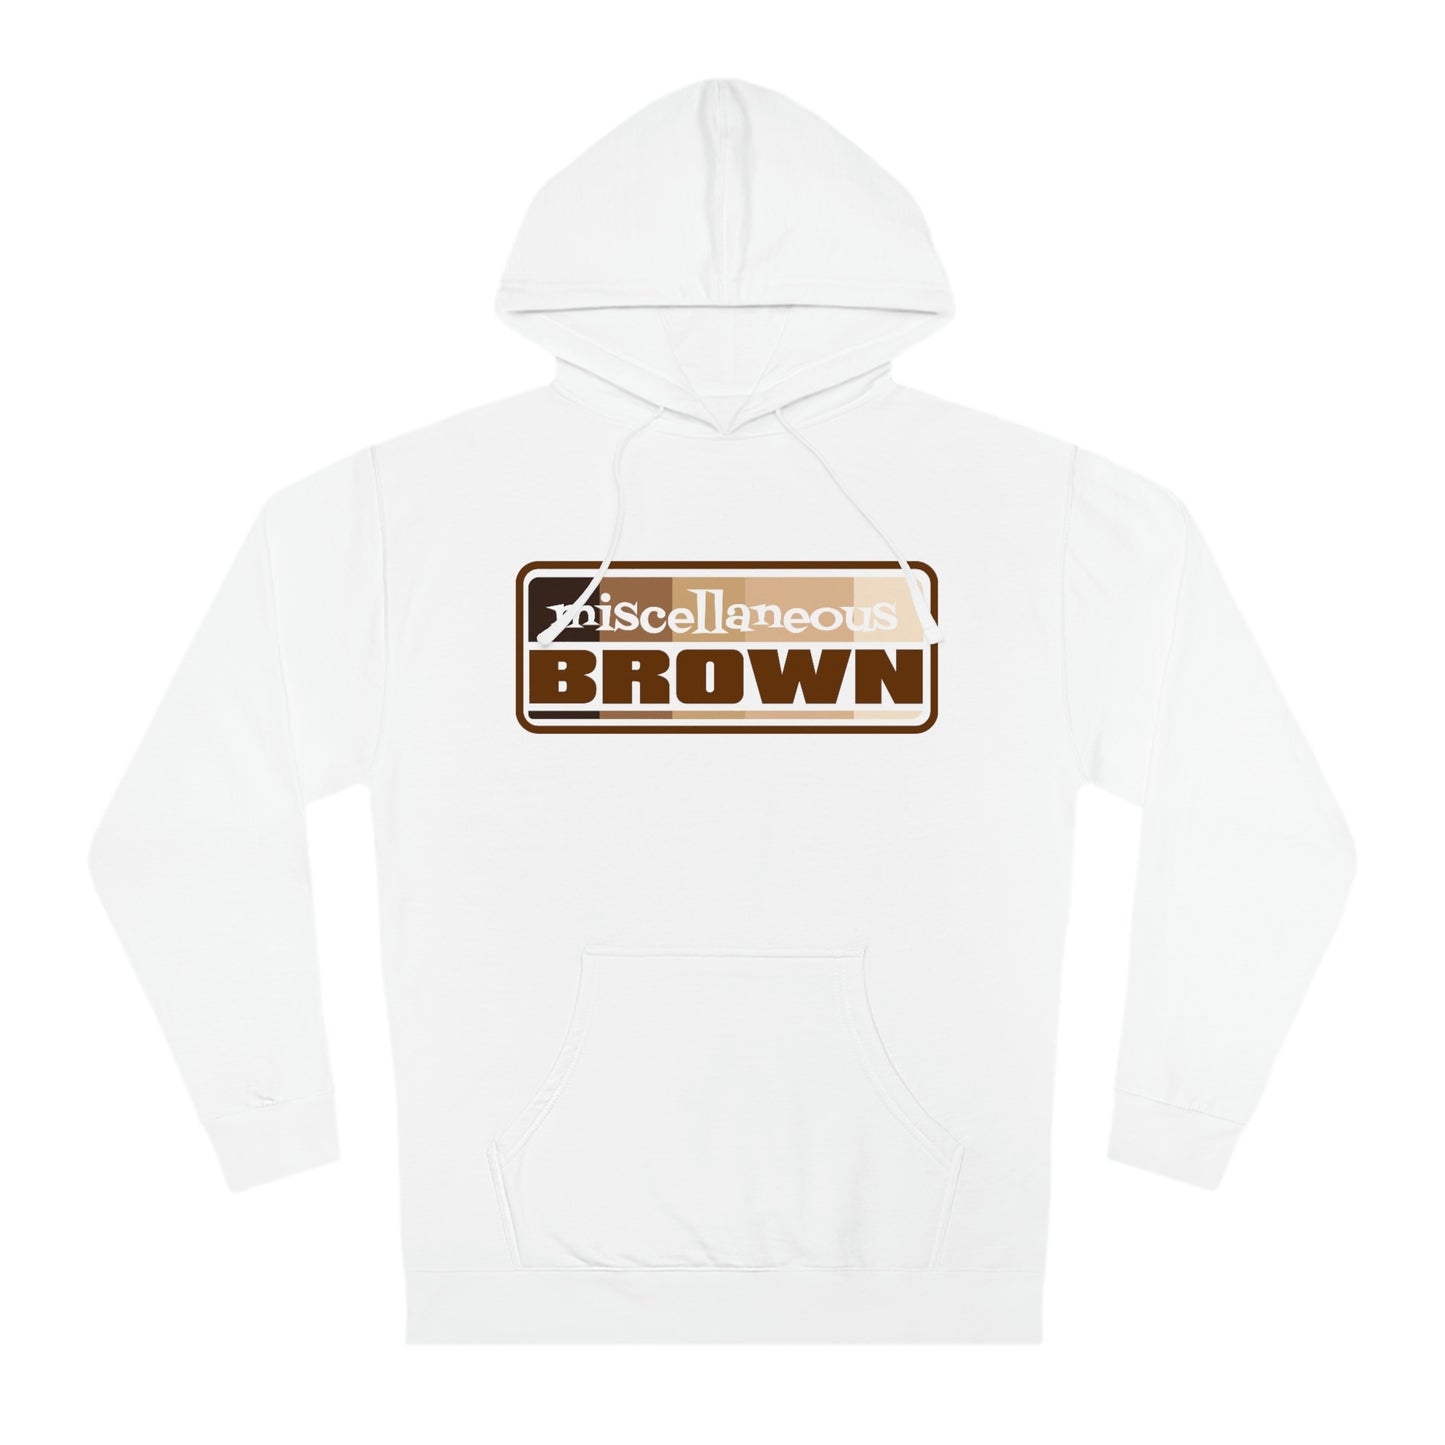 Official Miscellaneous Brown Comedy Special Unisex Hooded Sweatshirt